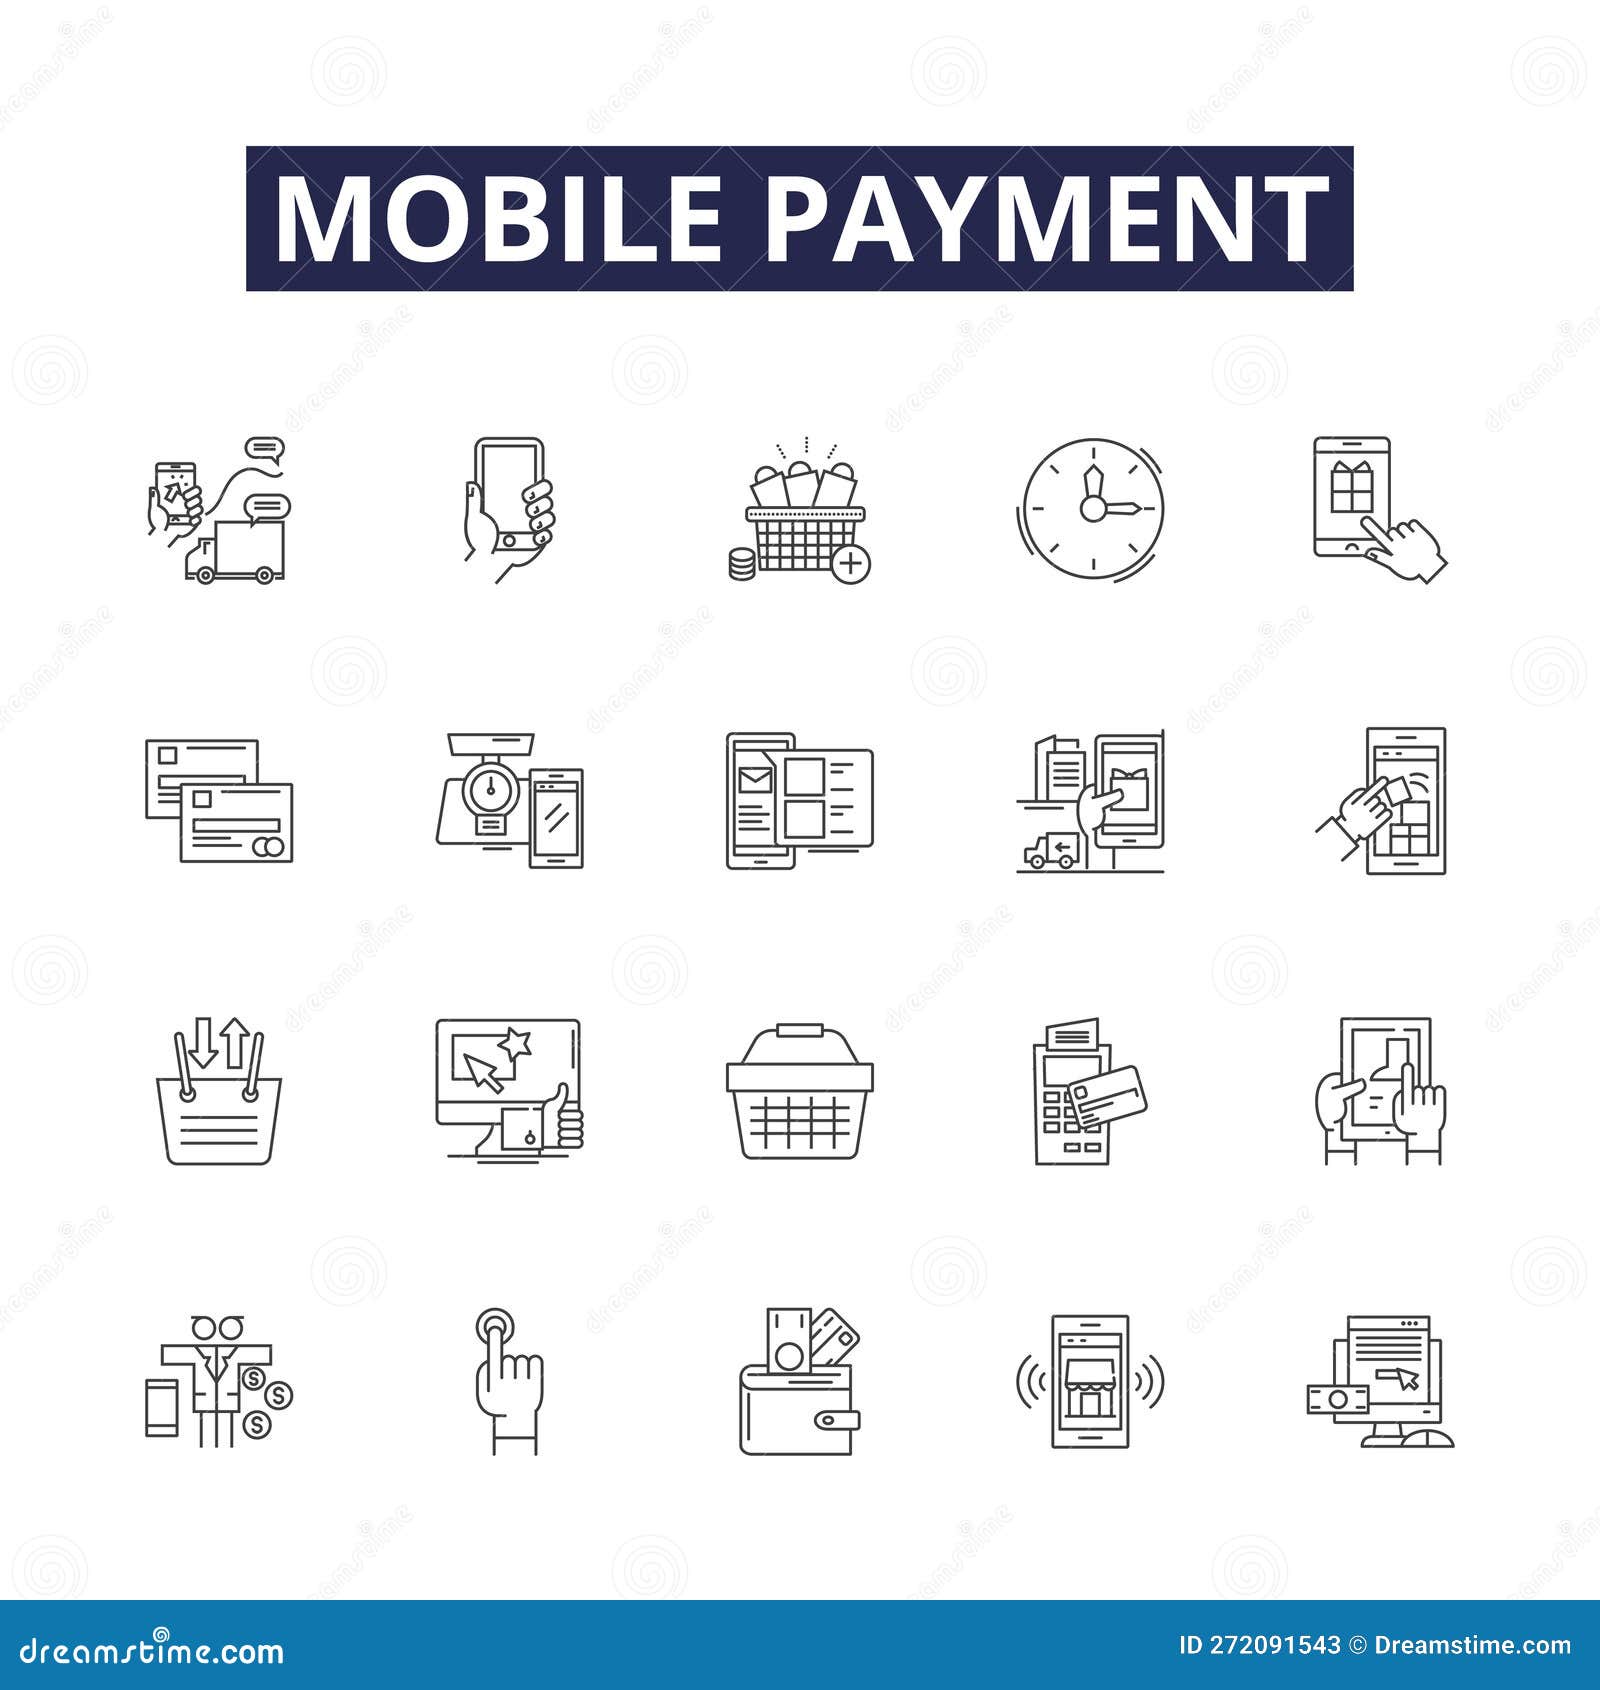 mobile payment line  icons and signs. wallet, mcommerce, nfc, cashless, biometrics, fingerprint, tokenization, pay